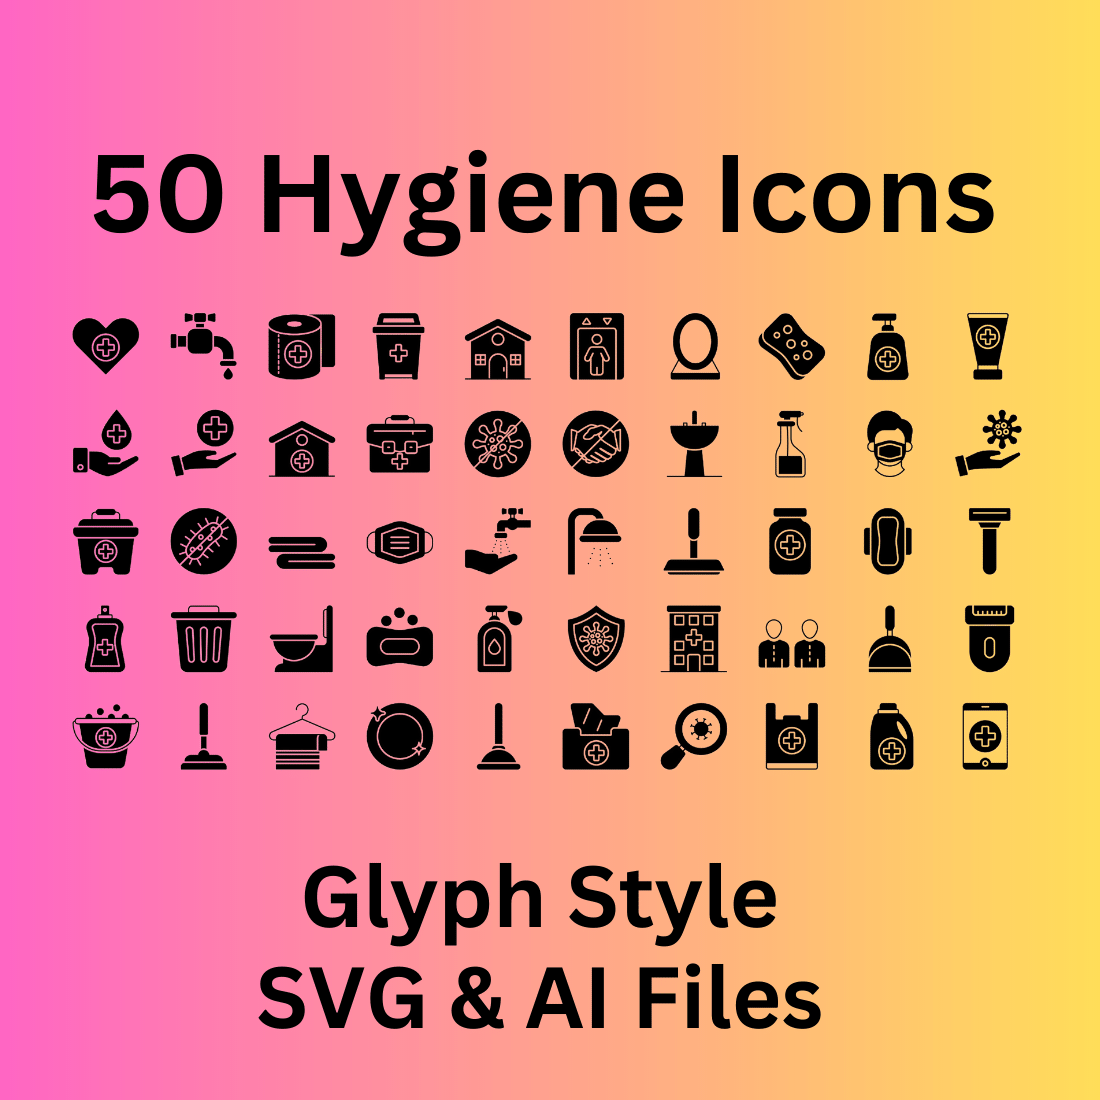 Hygiene Icon Set 50 Glyph Icons - SVG And AI Files cover image.